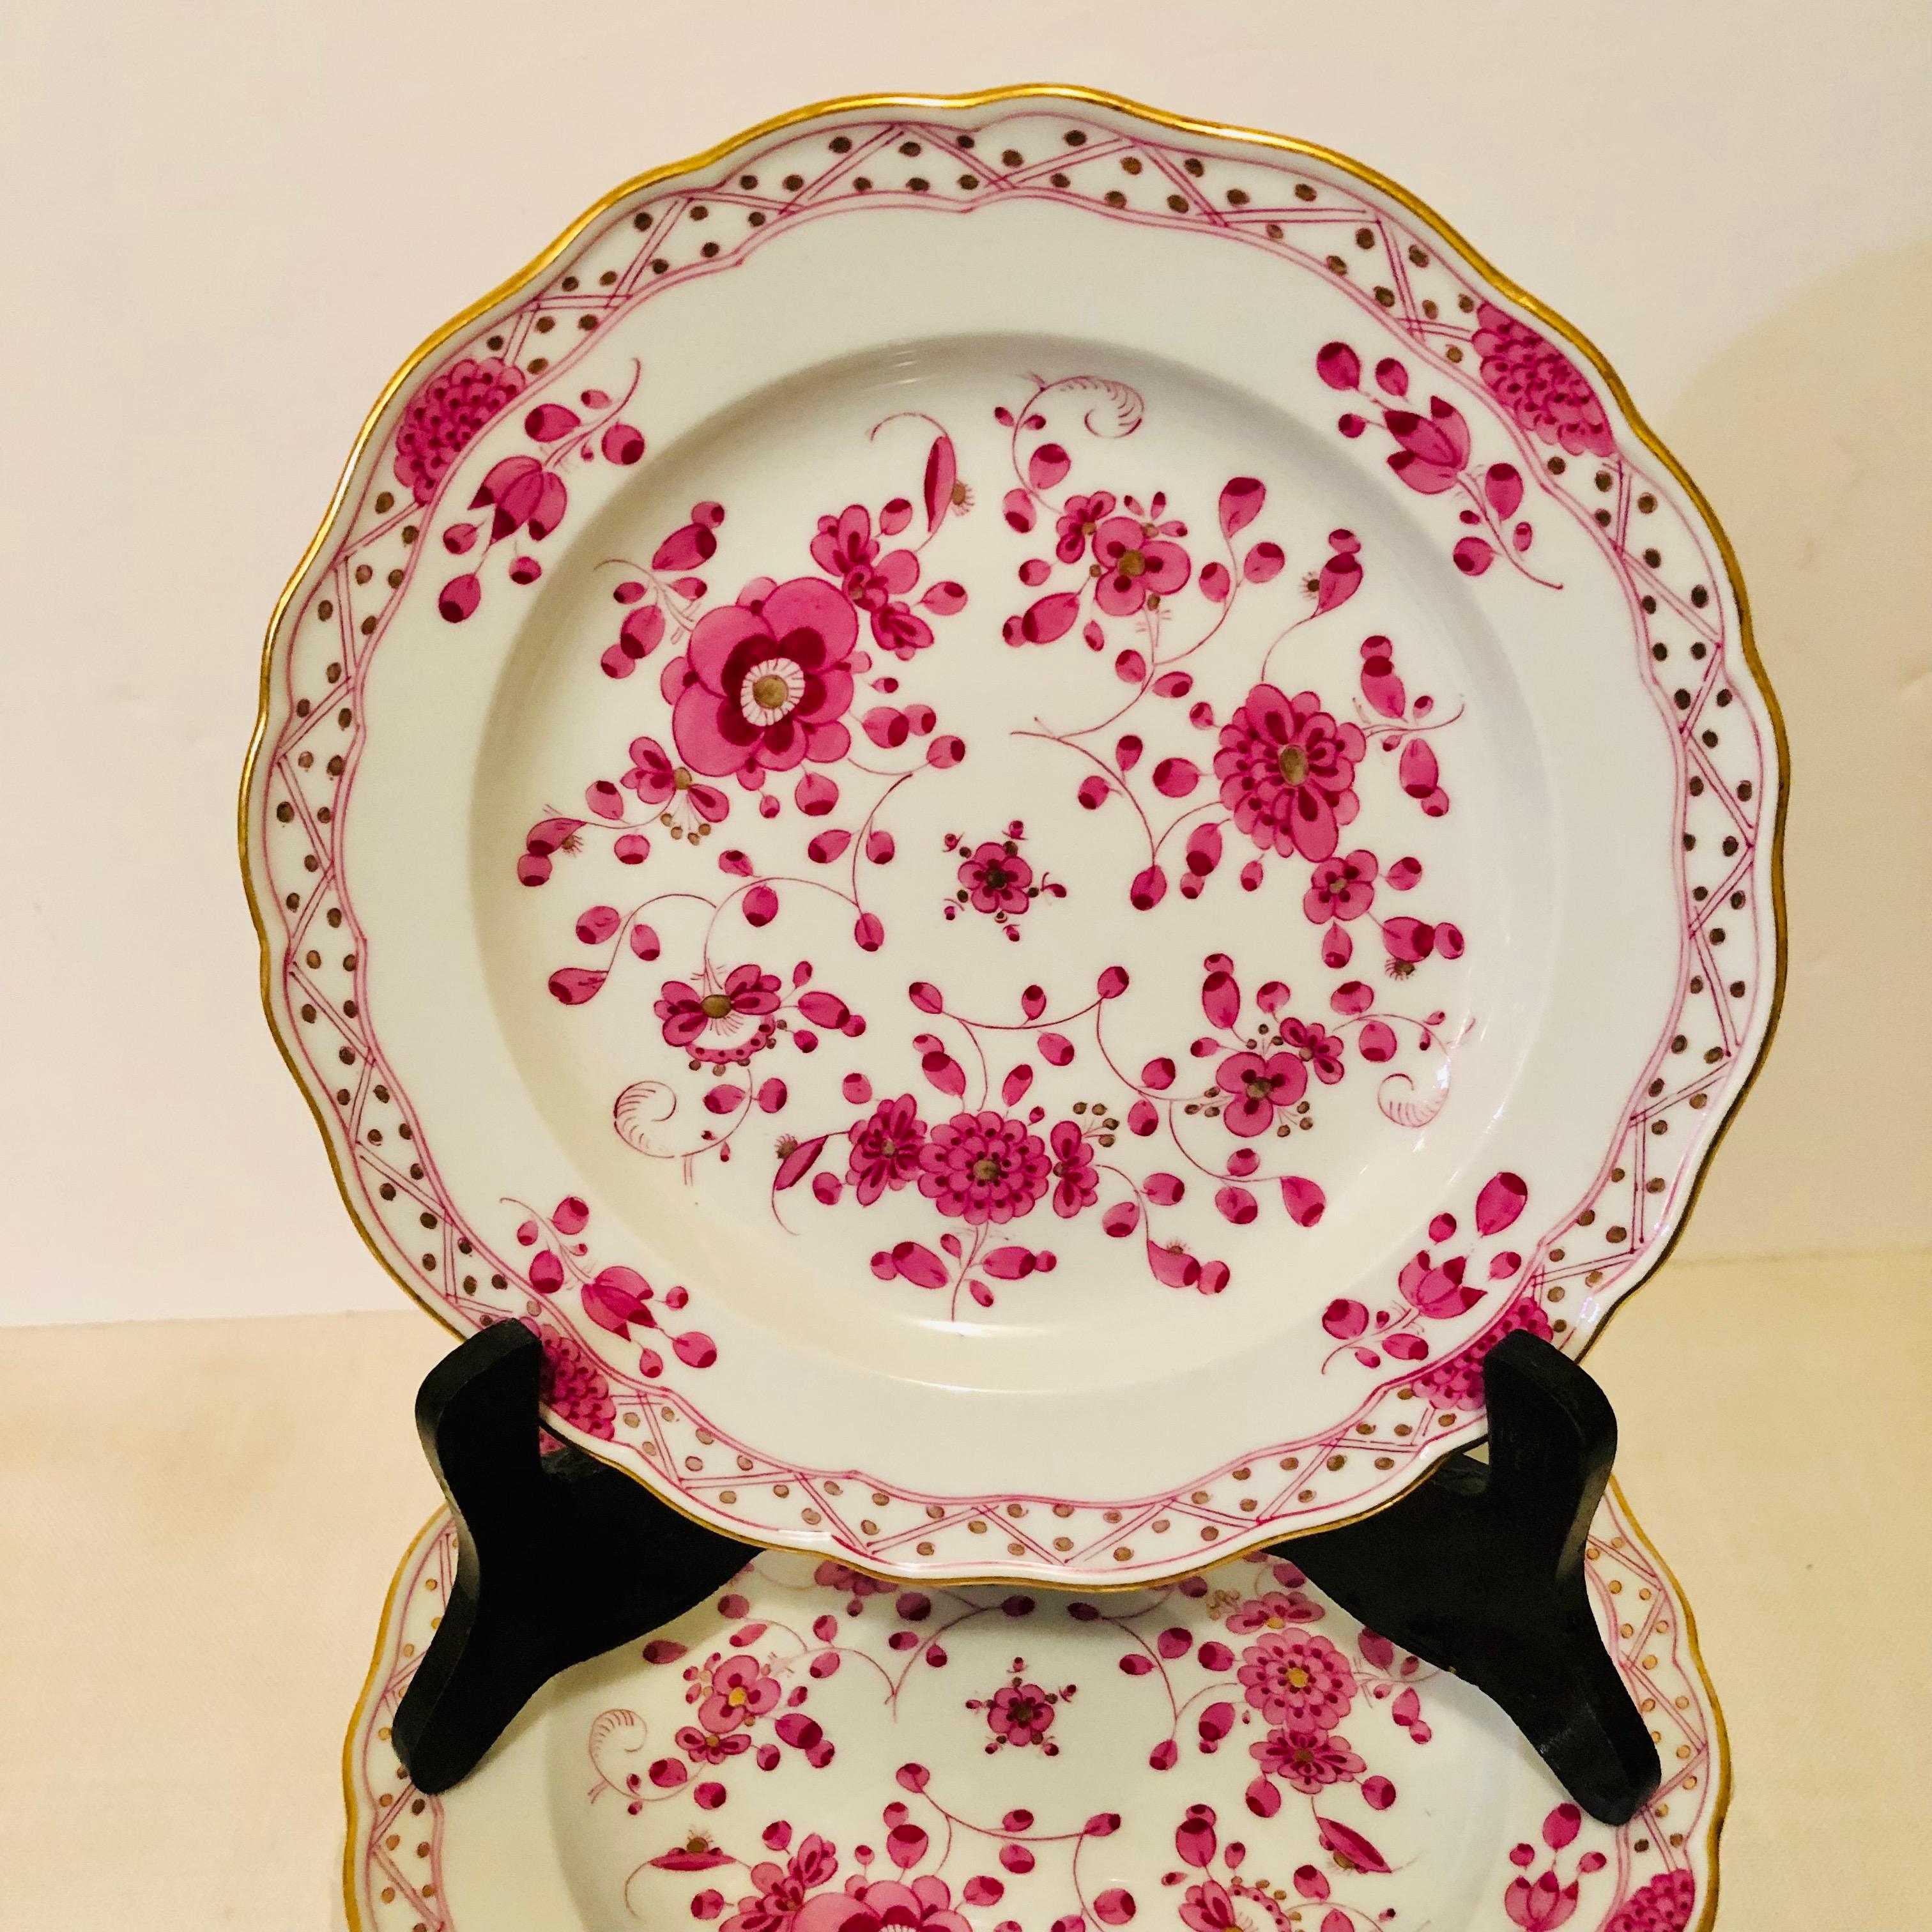 Porcelain Set of Fourteen Meissen Purple Indian Dessert Plates from the Late 19th Century